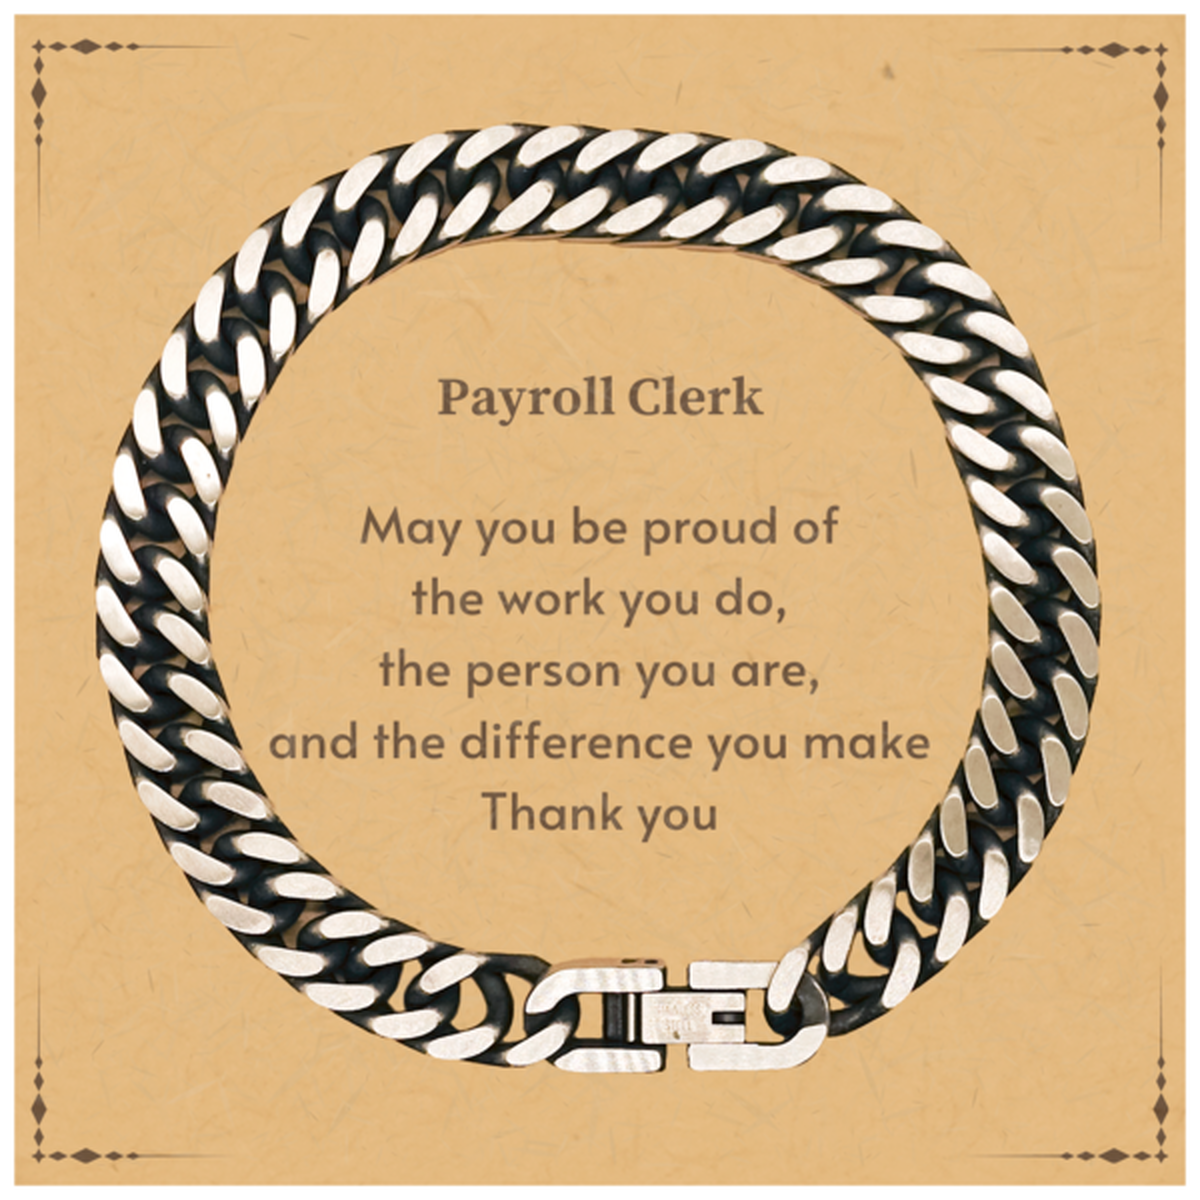 Heartwarming Cuban Link Chain Bracelet Retirement Coworkers Gifts for Payroll Clerk, Payroll Clerk May You be proud of the work you do, the person you are Gifts for Boss Men Women Friends